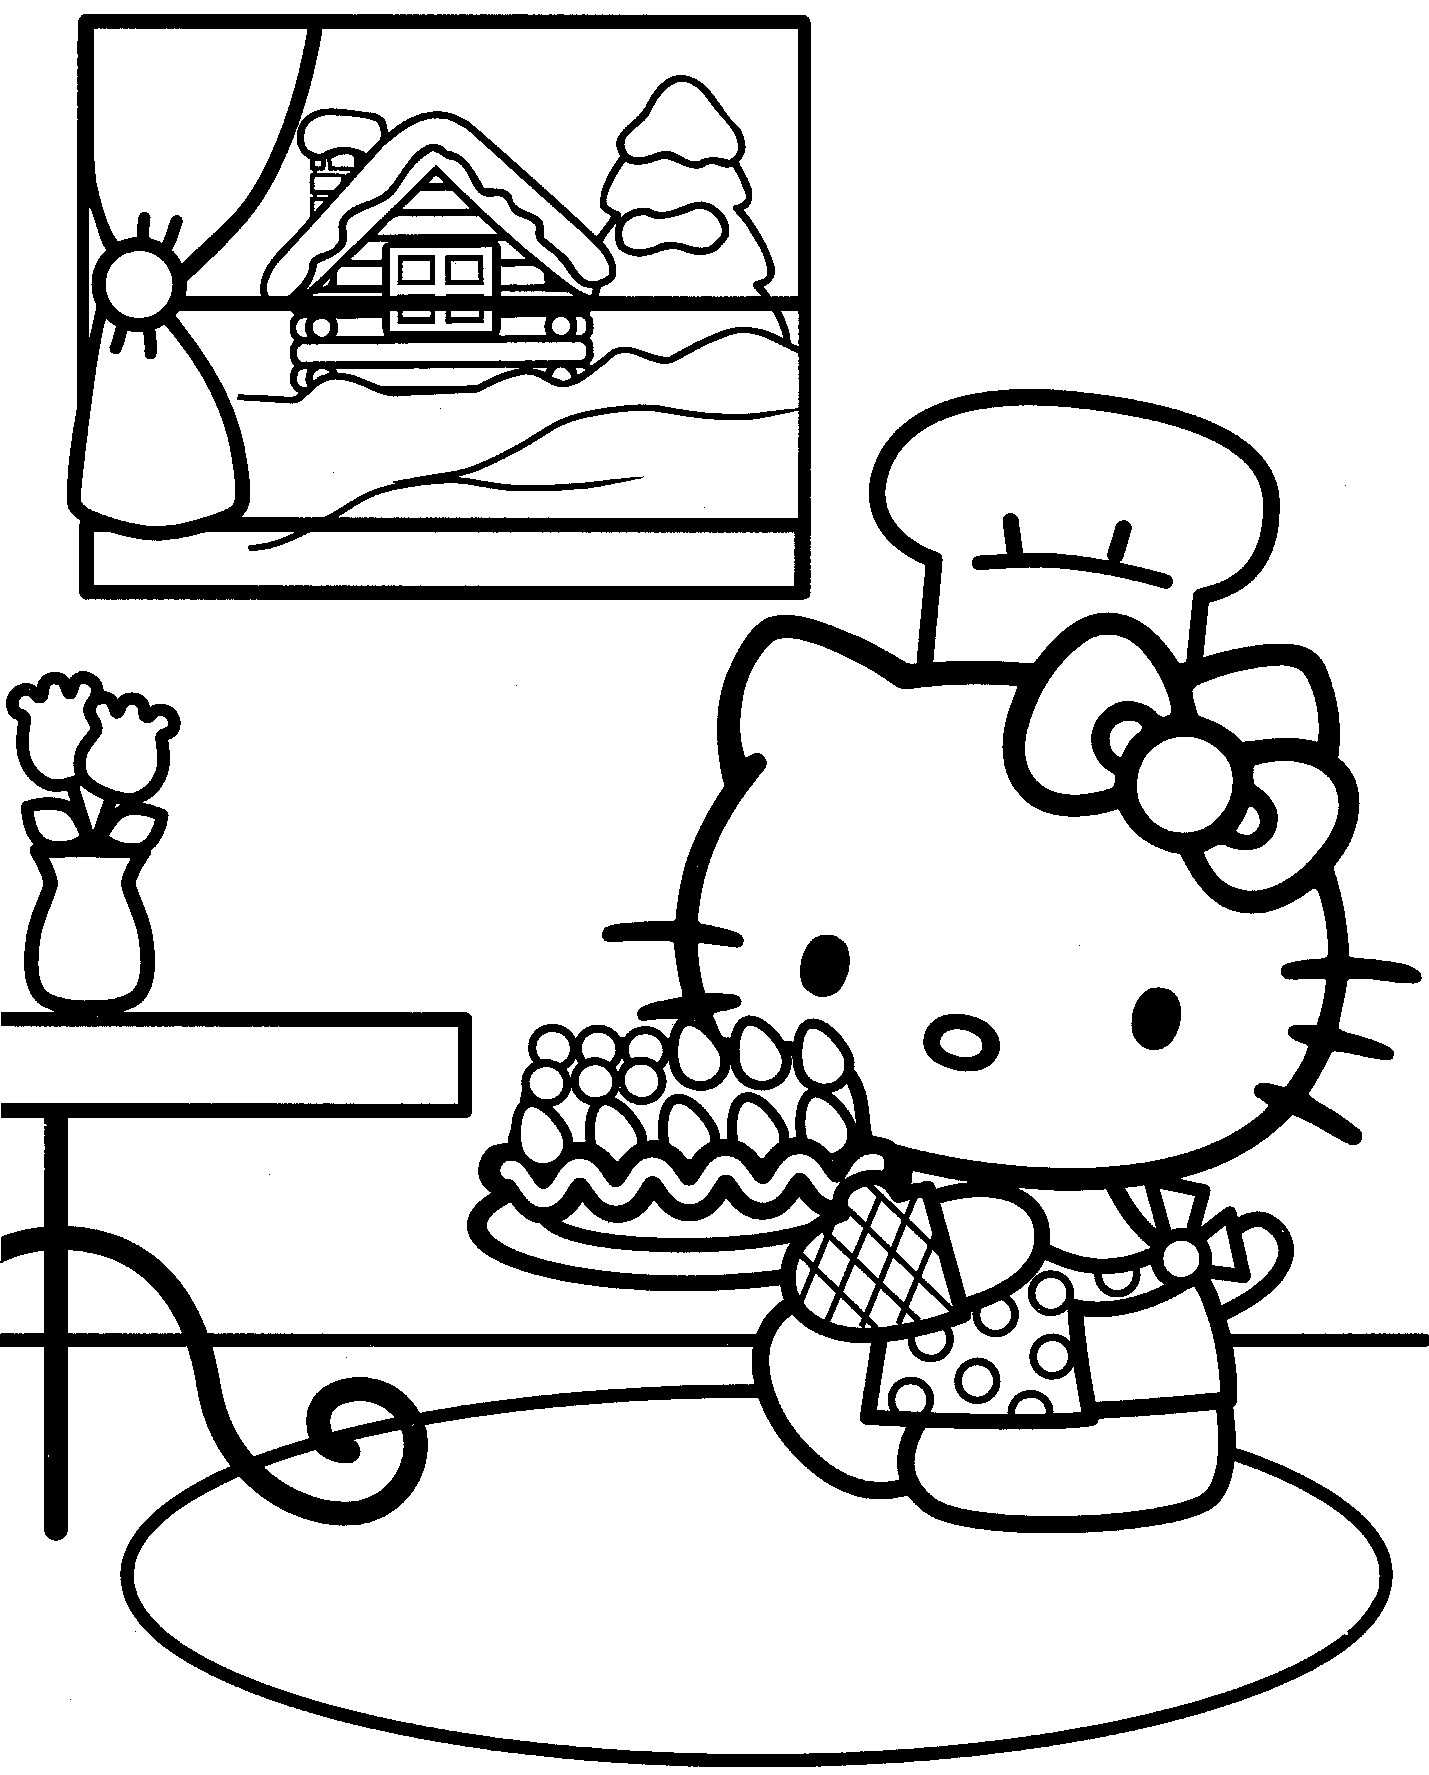 Download Coloring Pages Hello Kitty - 278+ SVG Cut File for Cricut, Silhouette and Other Machine